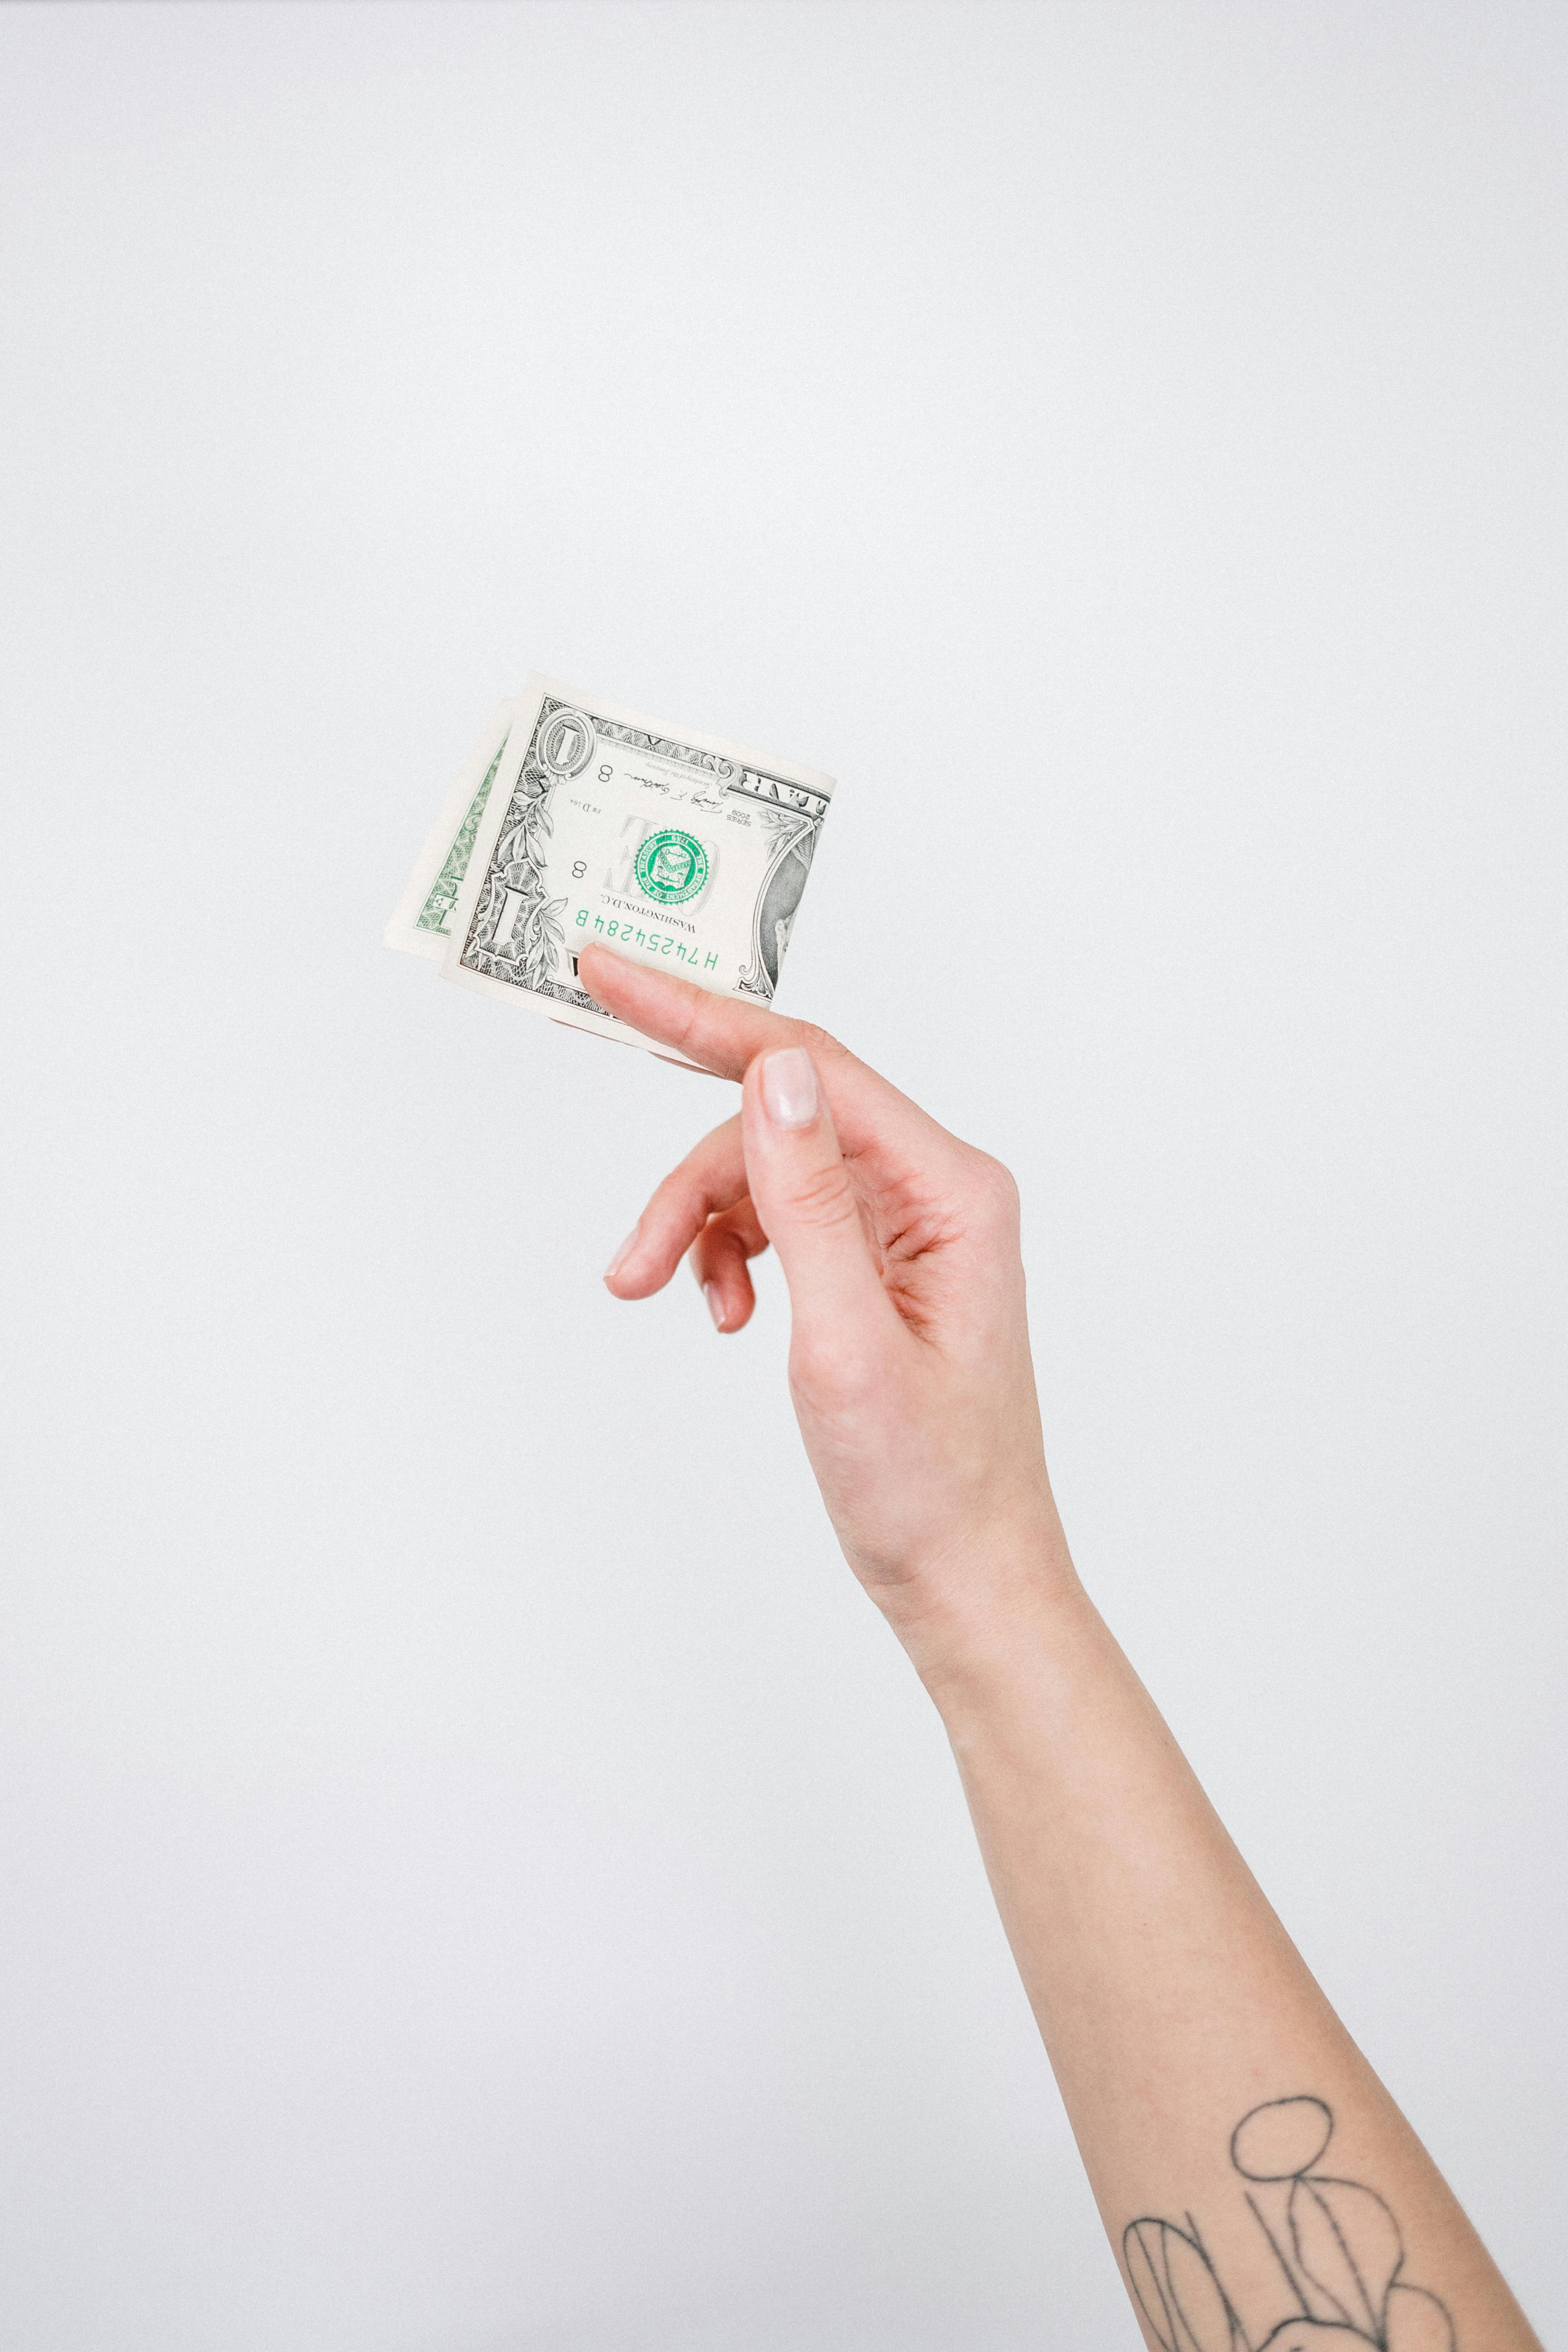 A hand holding a single bill | Source: Pexels